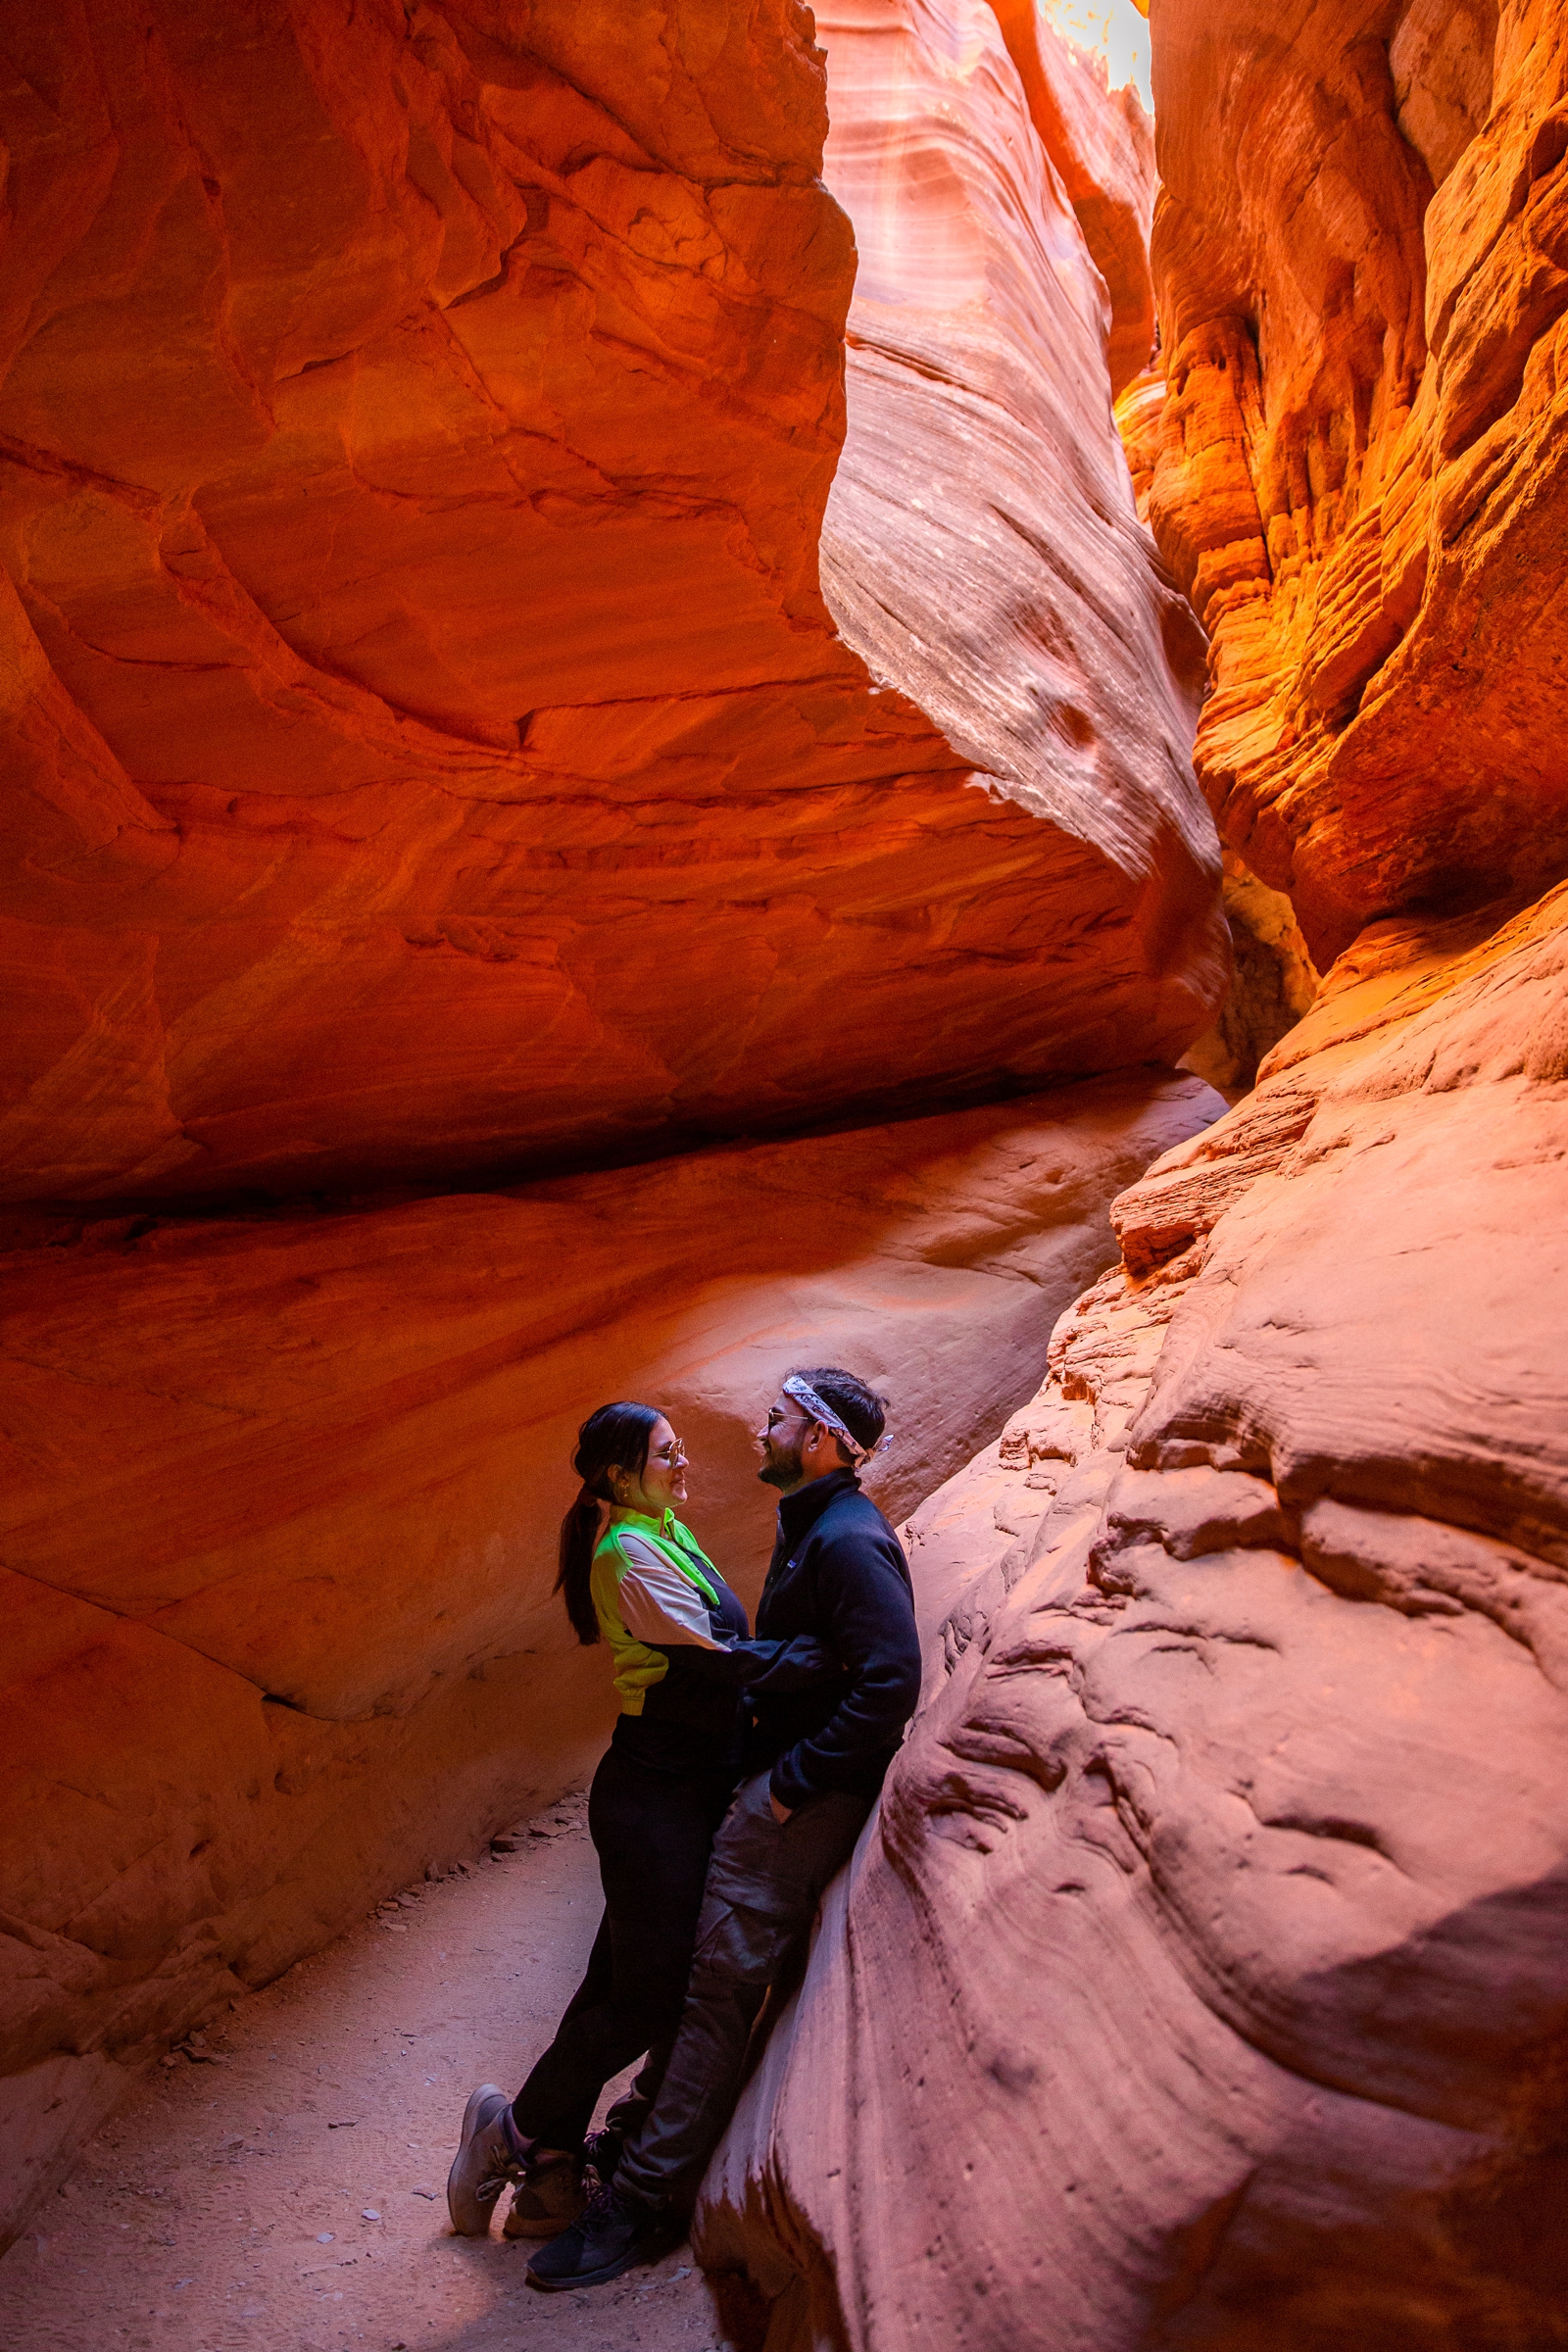 a newly engaged couple posing and smiling at each other for a picture in the Utah Slot Canyon during their adventurous hike